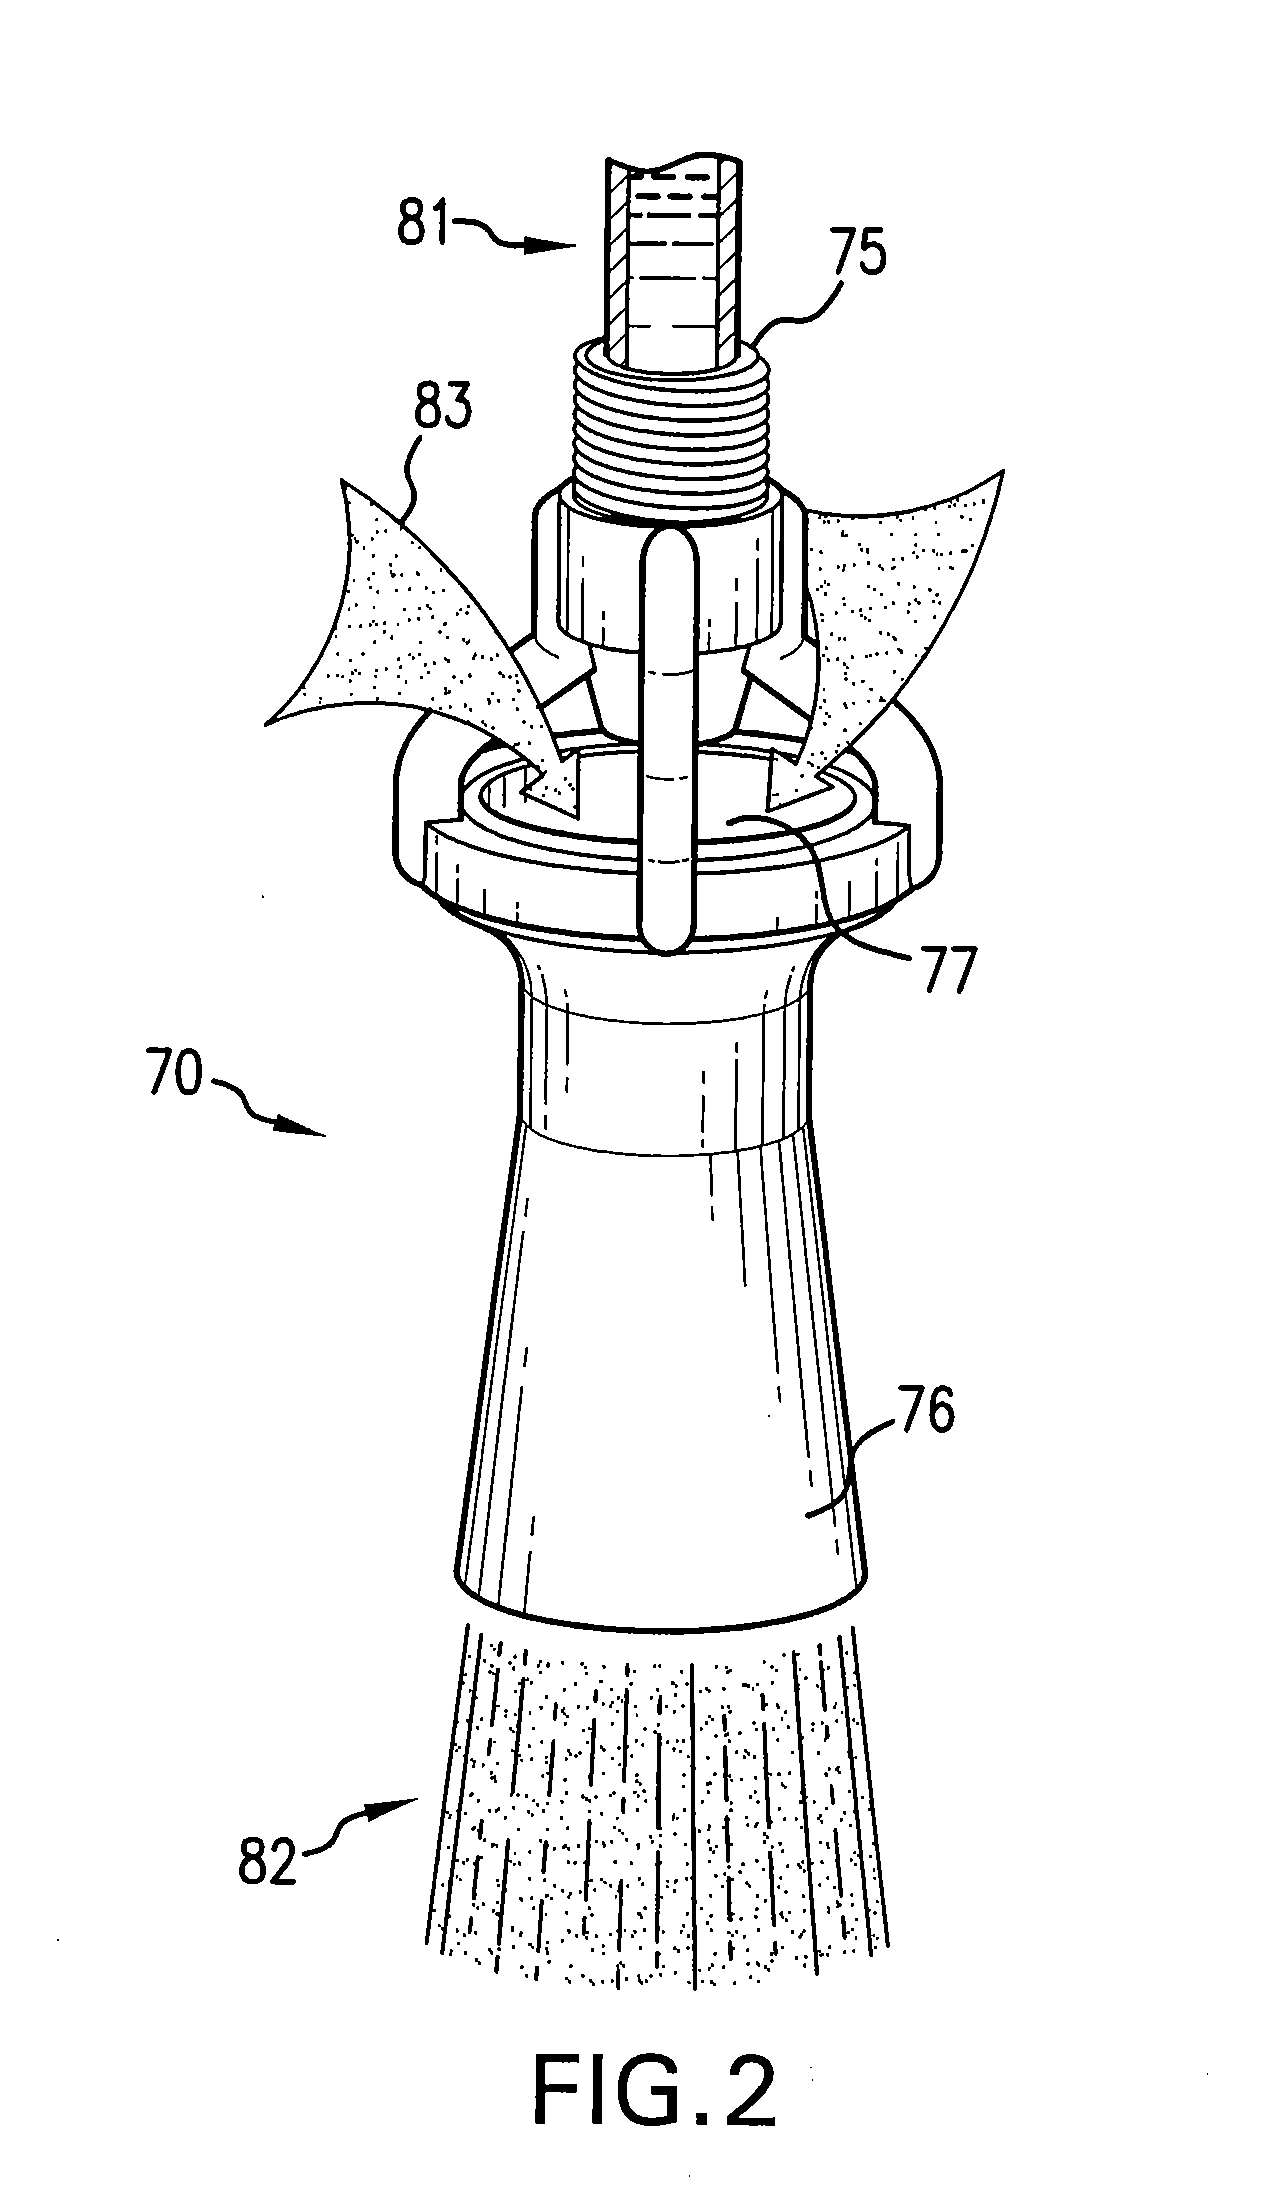 Apparatus and method for mixing a concentrated water treatment solution